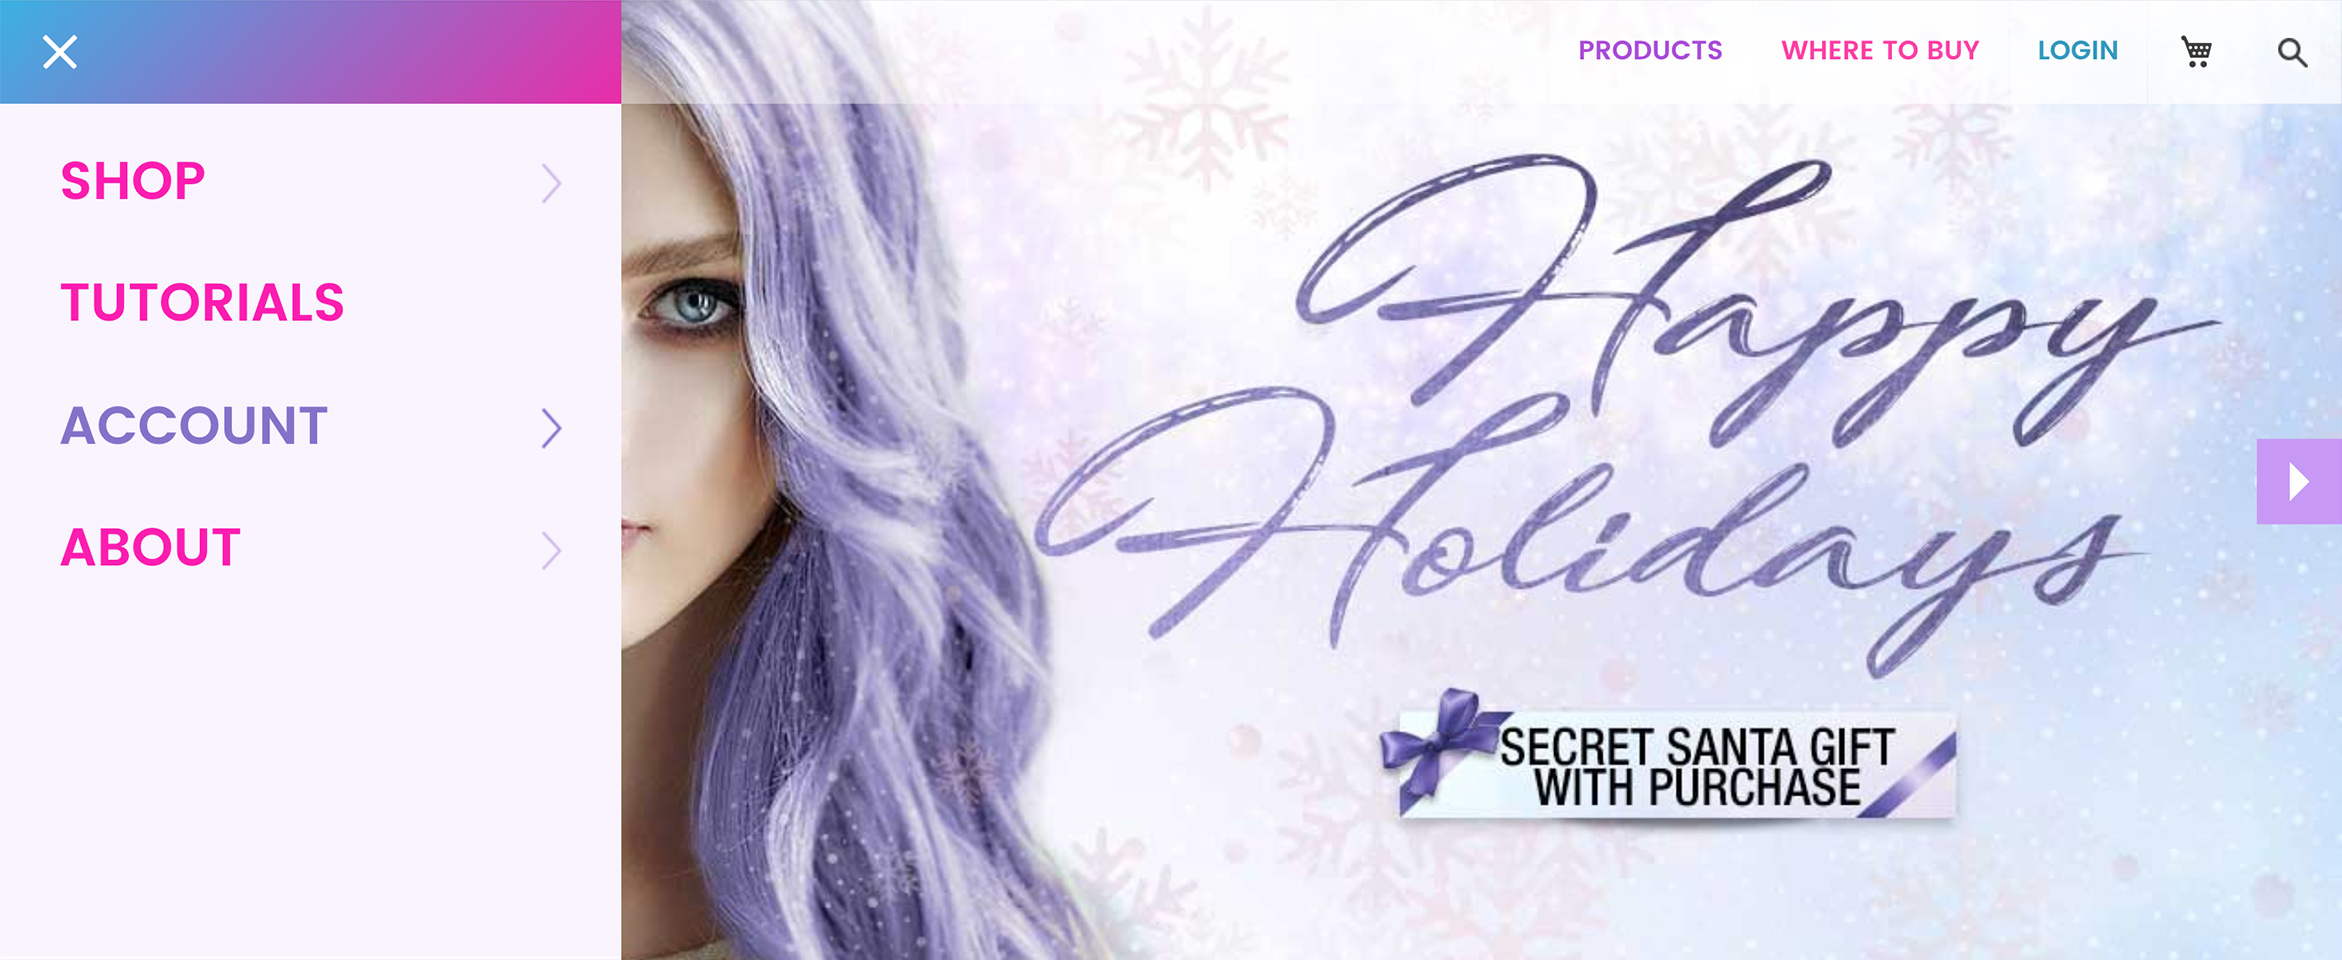 Bright Ecommerce Redesign for a Fantasy Hair Color Company Build Image-1